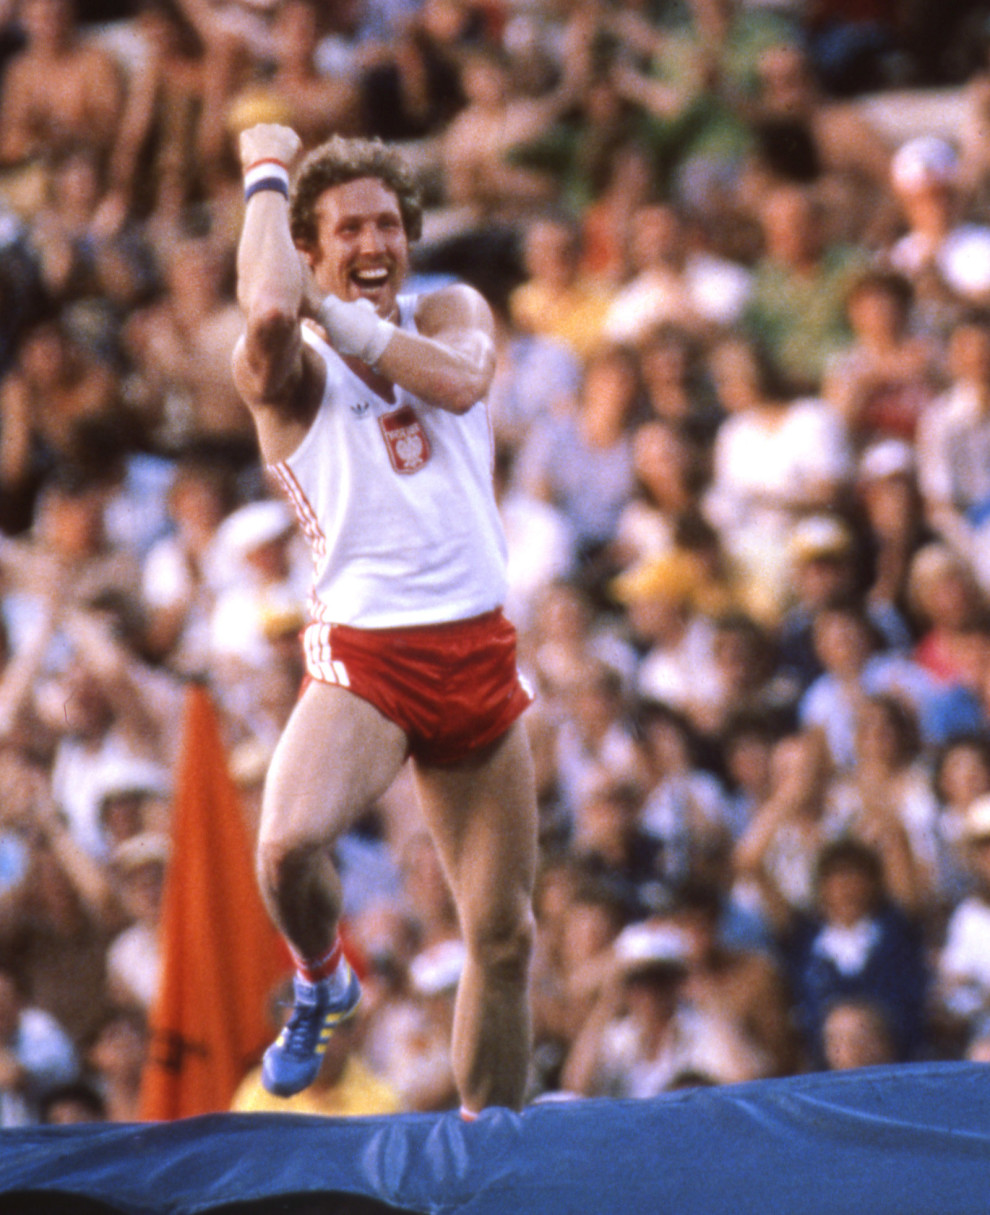 At the 1980 Summer Olympics in Moscow, the relationship between Poland and the Soviet Union was greatly strained. Experiencing the tensions firsthand was Poland’s pole vaulter Wladyslaw Kozakiewicz, who competed amid an onslaught of boos and heckling from the largely Soviet crowd. So it’s no surprise that when Kozakiewicz won gold over the Soviets with a new world record, he responded to the audience with a gesture of appreciation. The Soviet sport officials demanded an explanation for the obscenity, to which the Polish ambassador in Moscow simply responded that Kozakiewicz always makes the gesture after setting new world records.